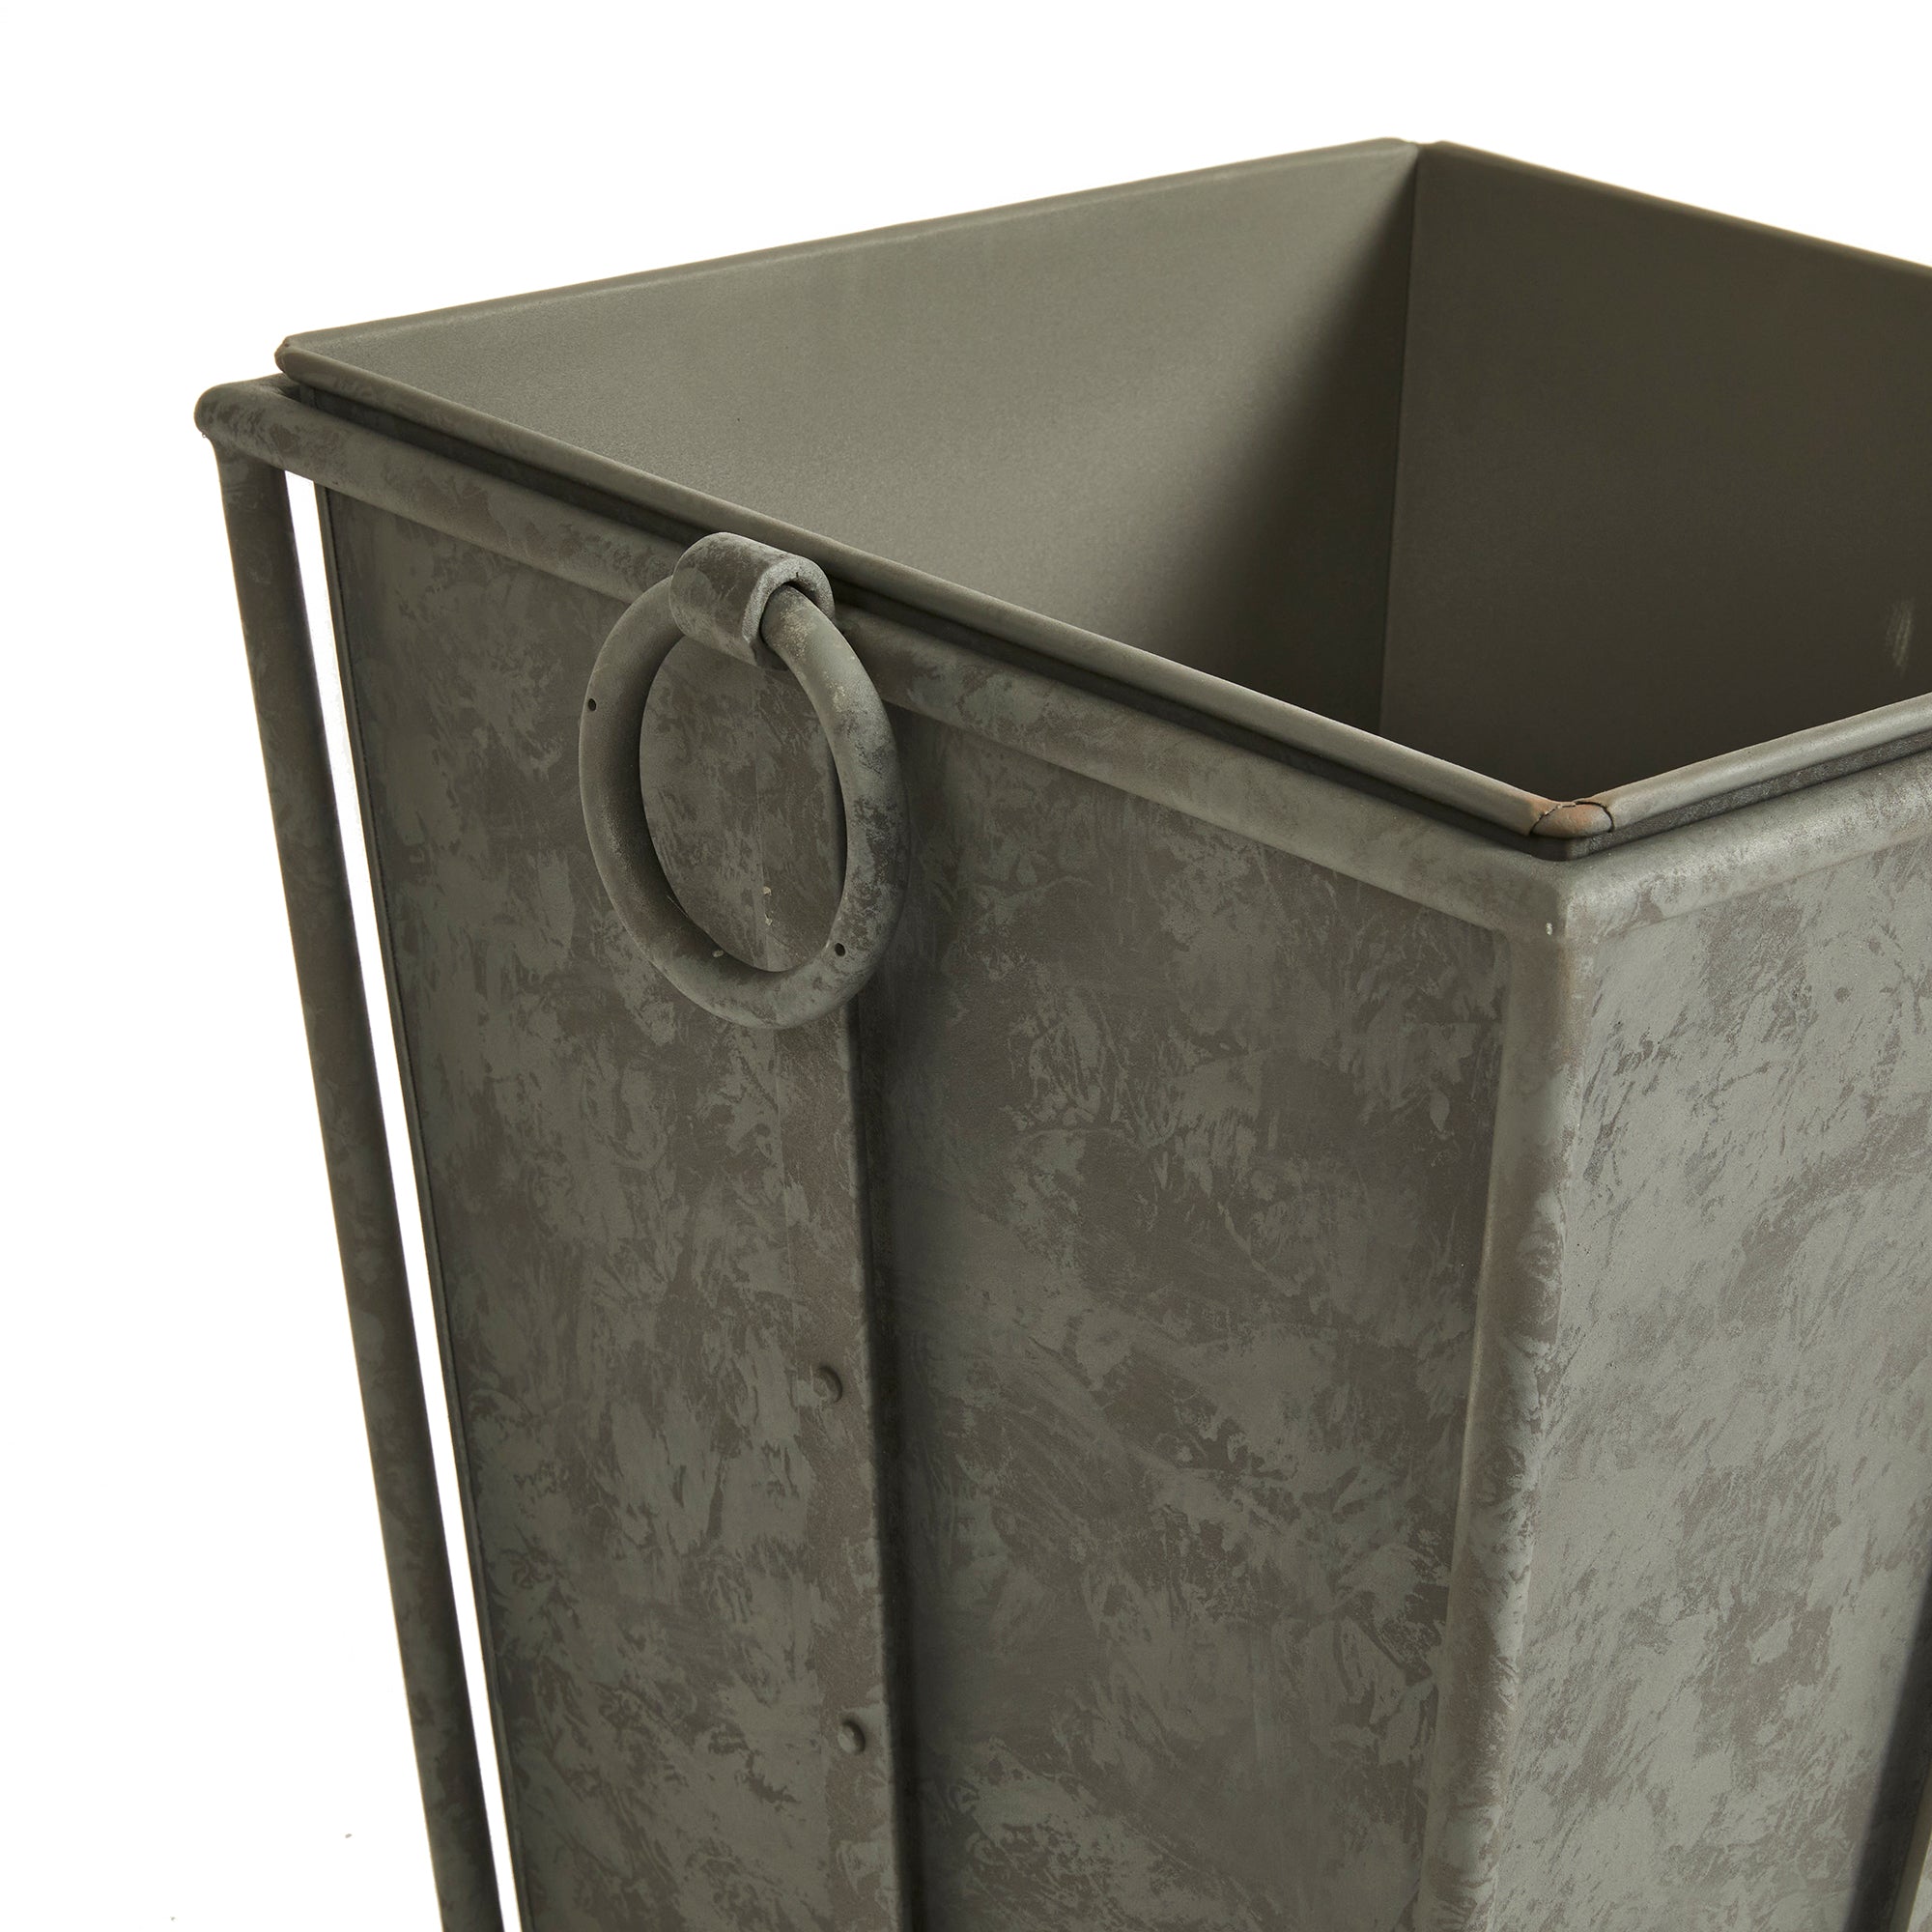 With metal liners that easily slide out, the Callahan Tapered Planter is as practical as it is handsome. The rounded handles and traditional design make it an outdoor classic. Amethyst Home provides interior design, new construction, custom furniture, and area rugs in the Tampa metro area.